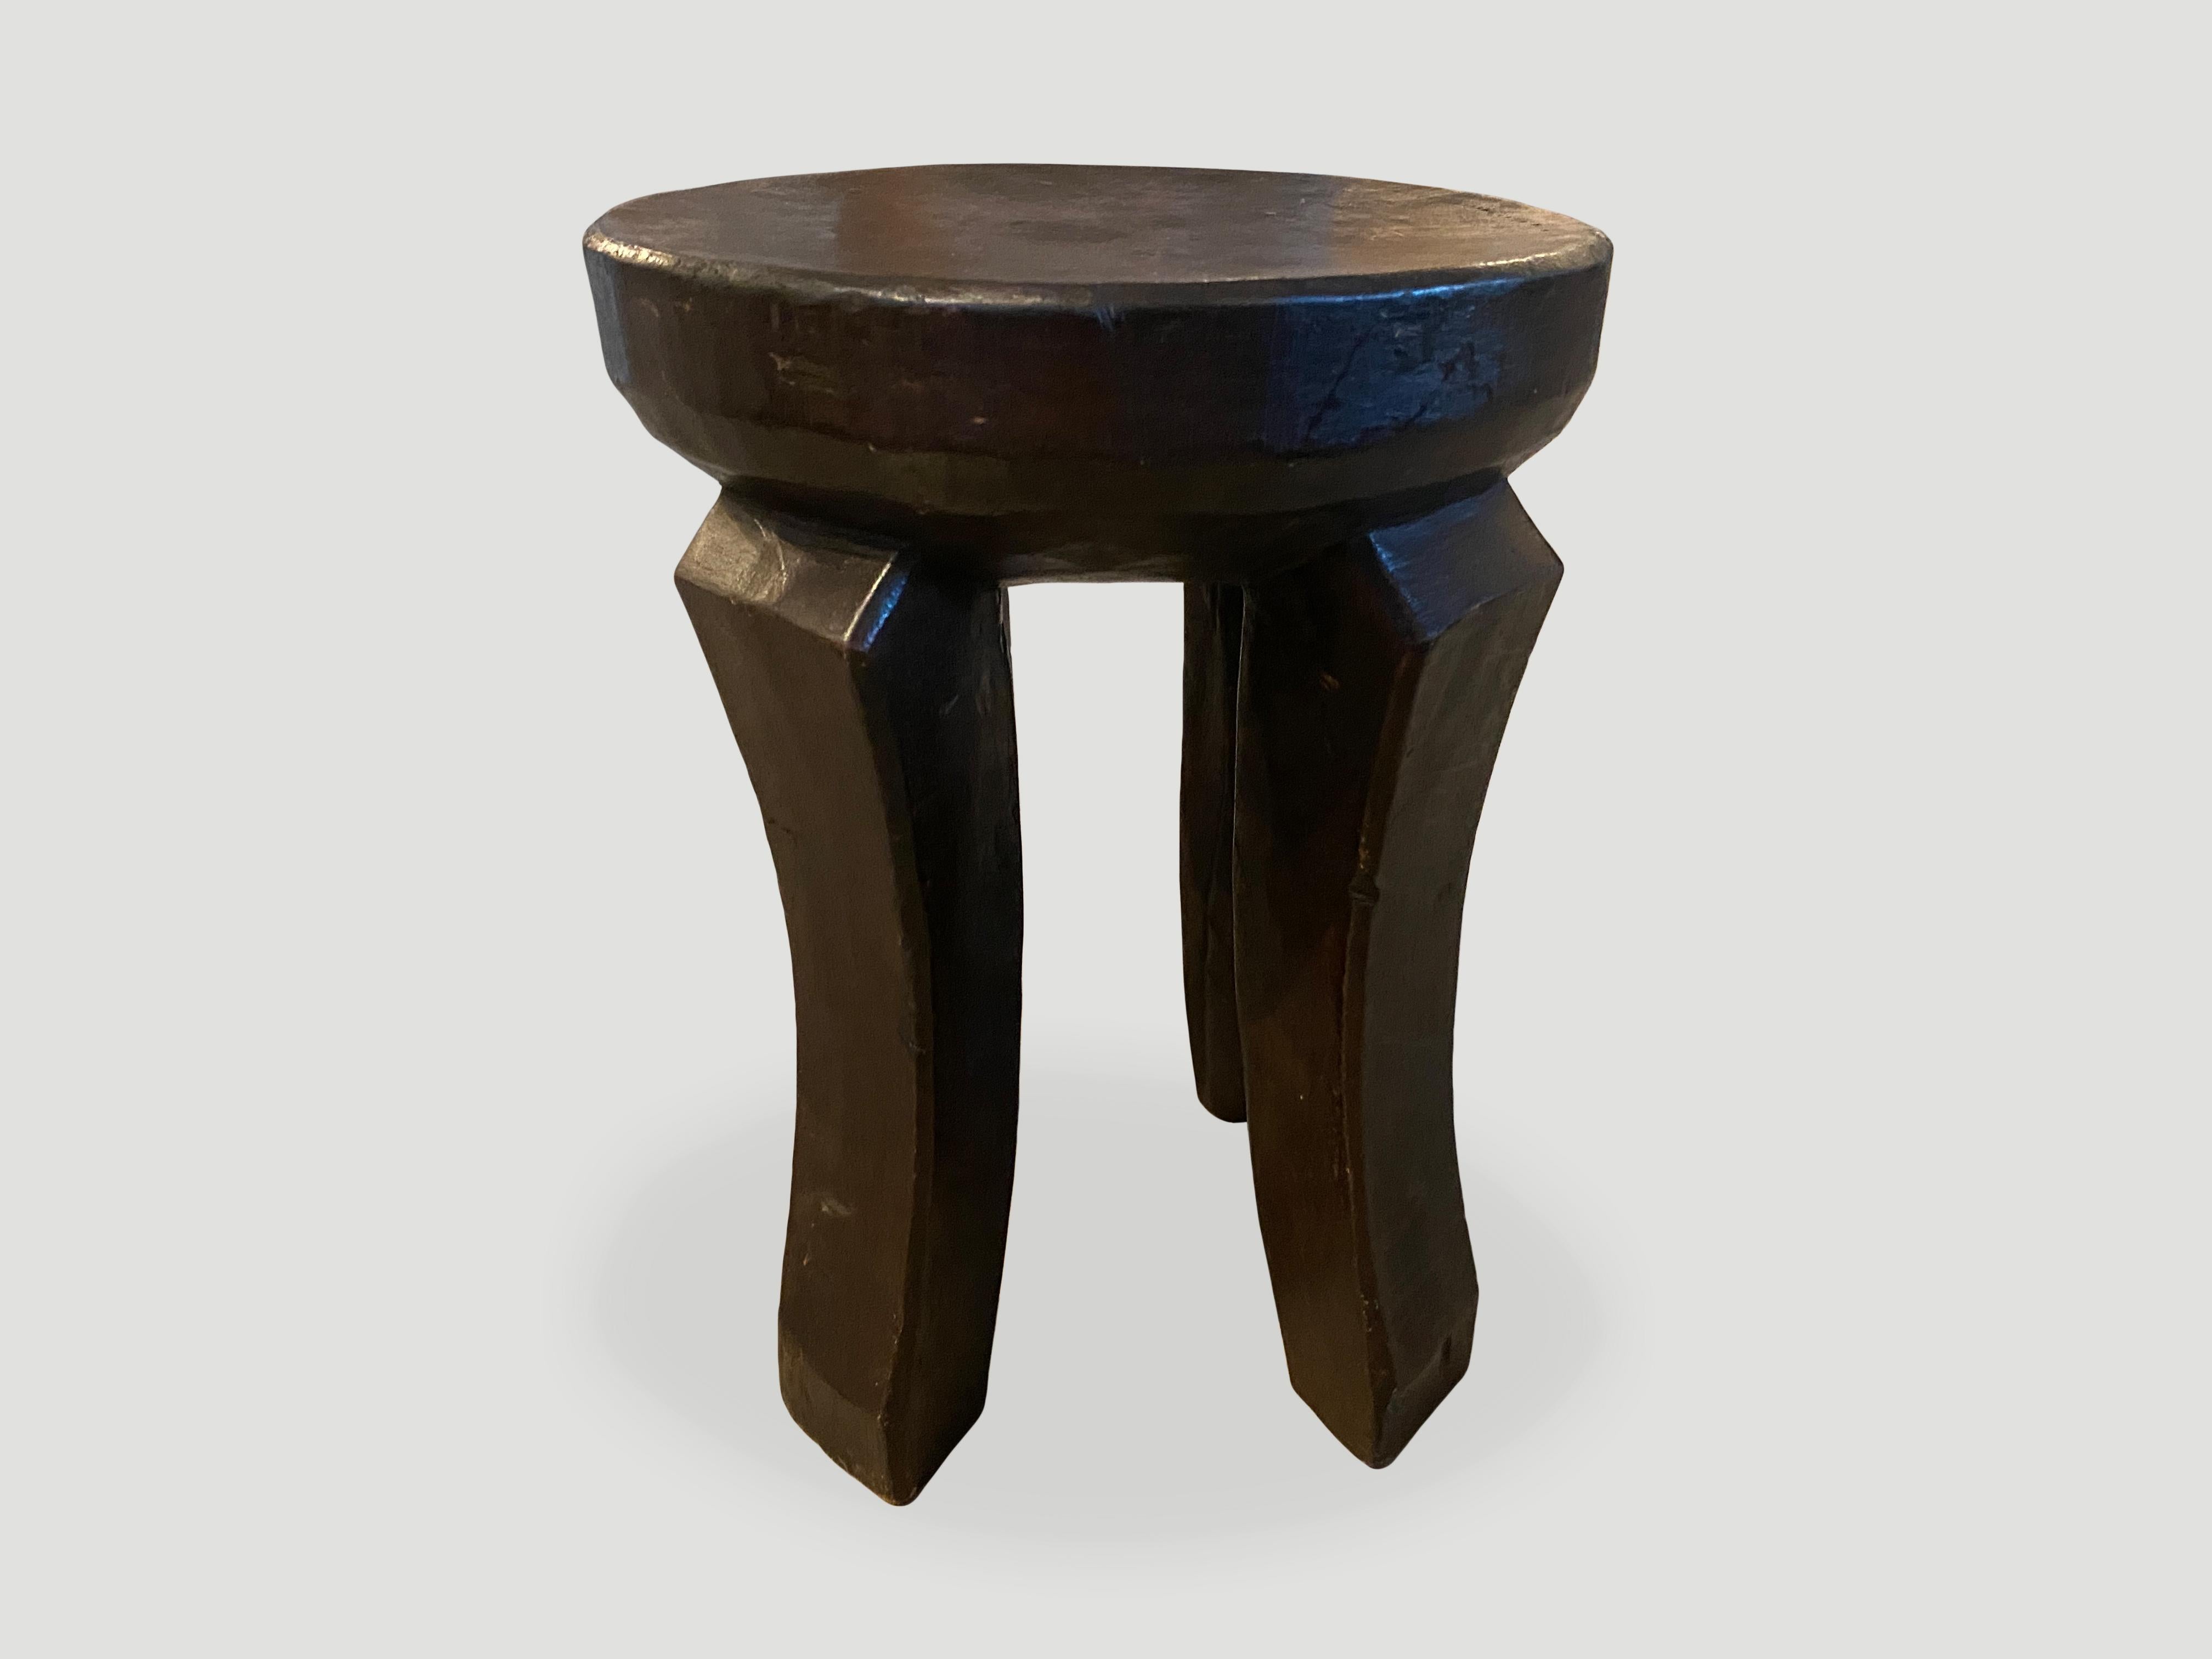 Antique African side table or stool hand carved from a single block of mahogany wood. The top is a thick bevel with beautiful hand carved legs. These stools have become collectable in recent years. We only source the best. We have a pair. The price